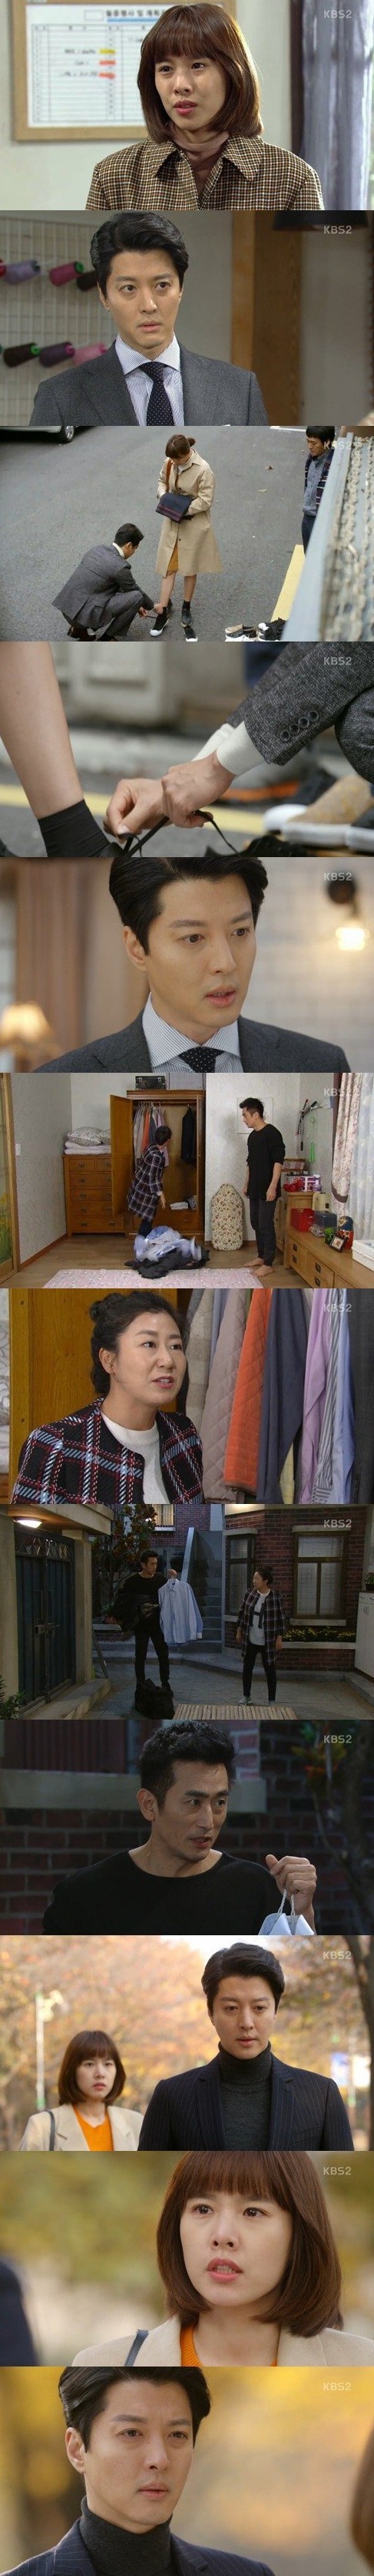 episodes 23 and 24 captures for the Korean drama 'The Gentlemen of Wolgyesu Tailor Shop'